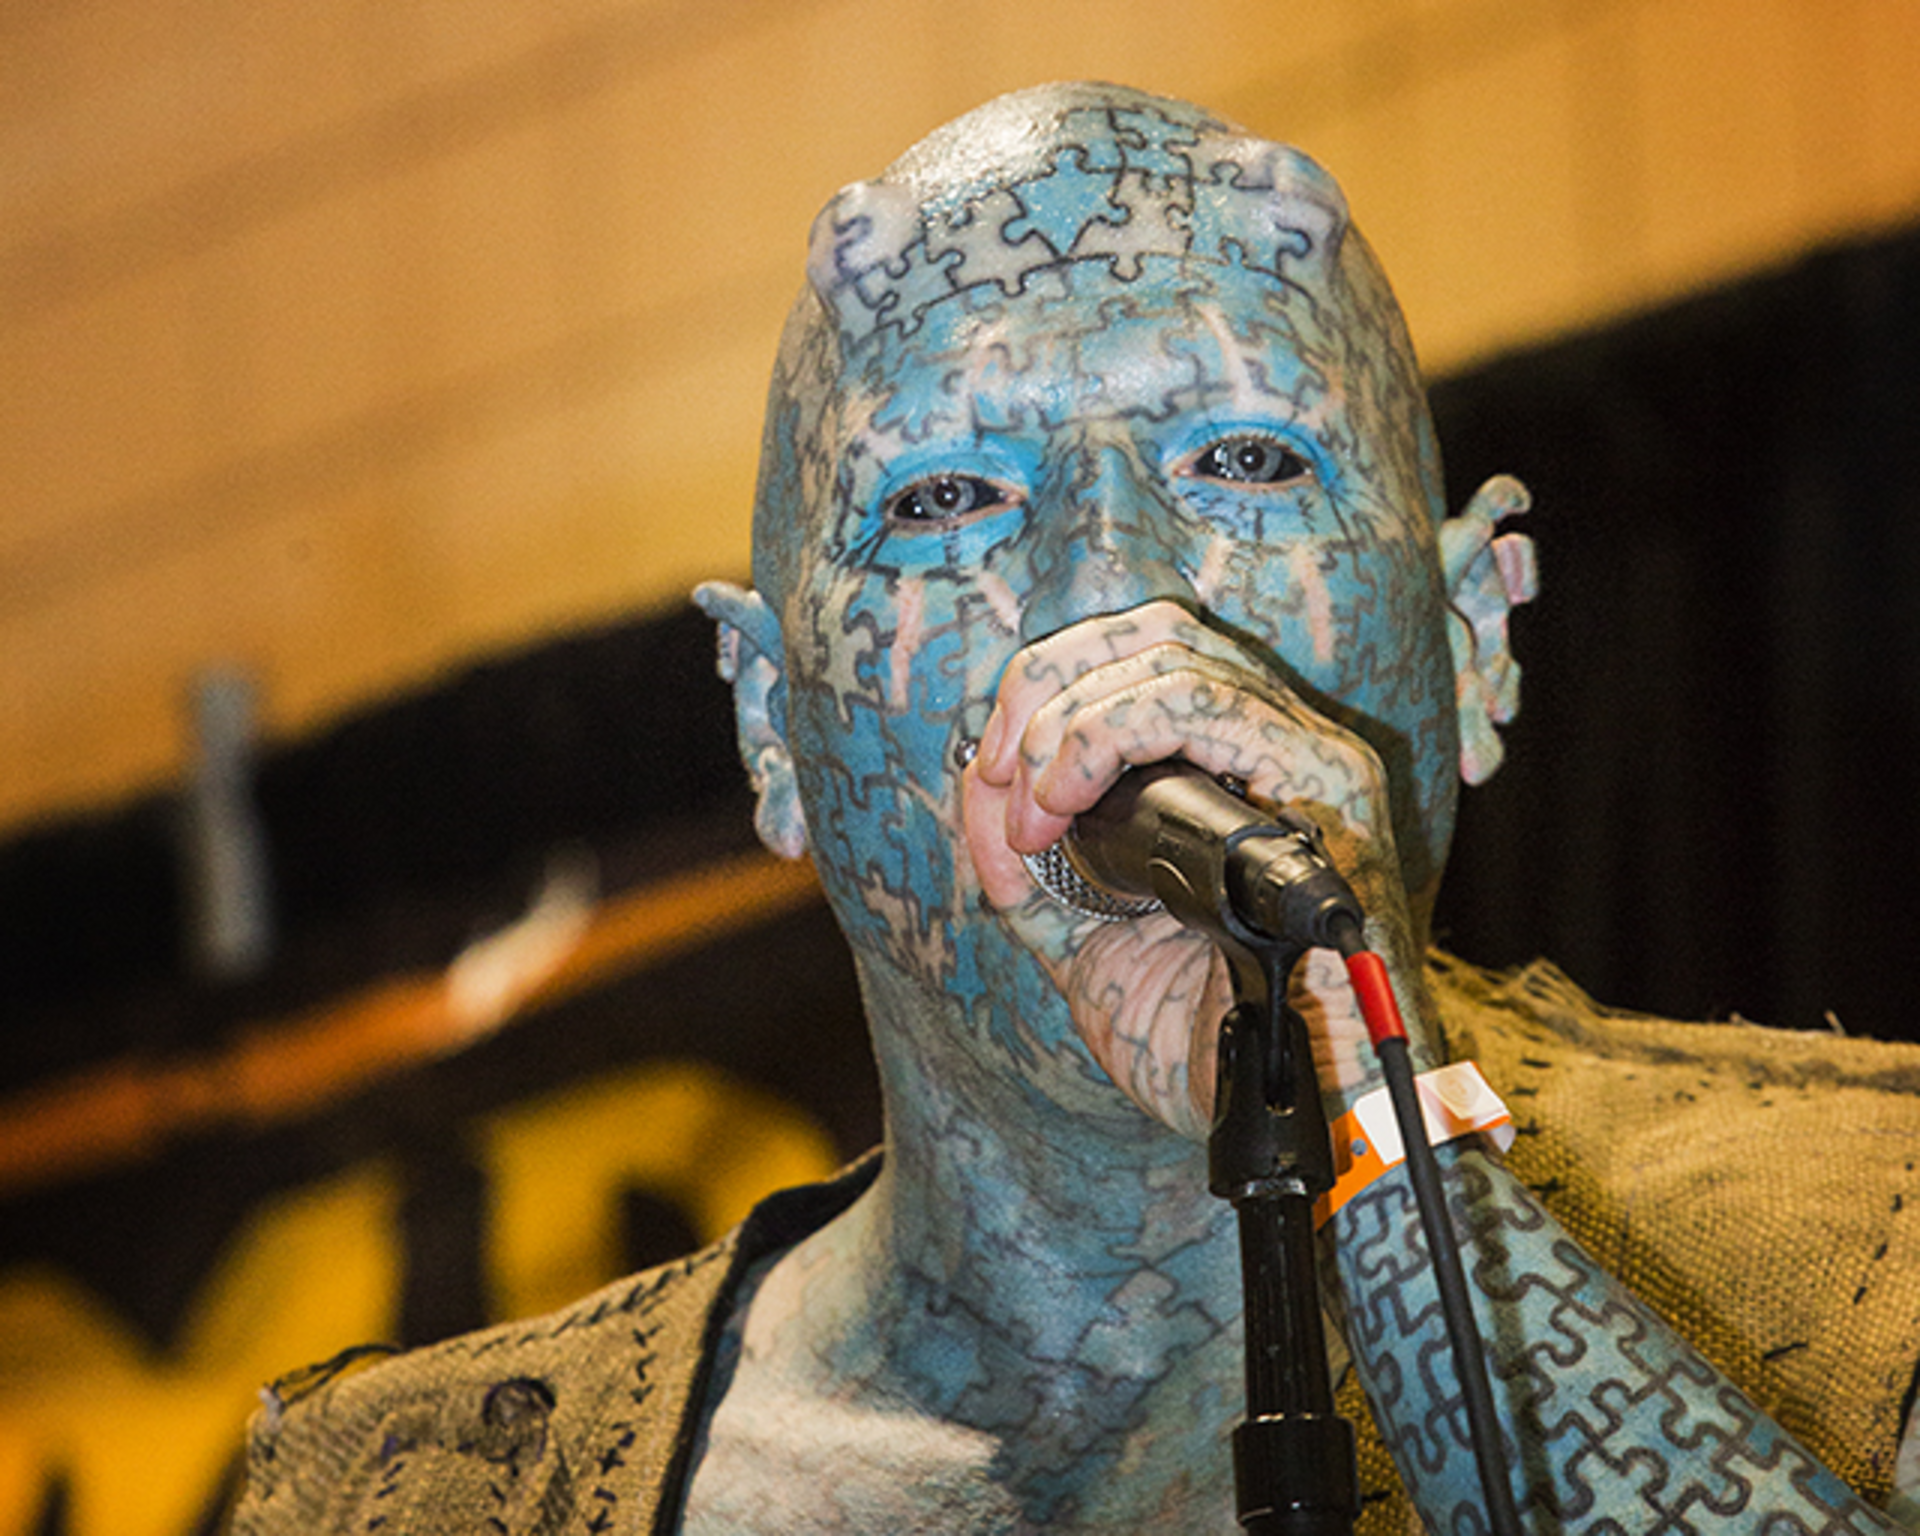 Sparks fly at the Tampa Tattoo Arts Convention | Tampa | Creative Loafing  Tampa Bay